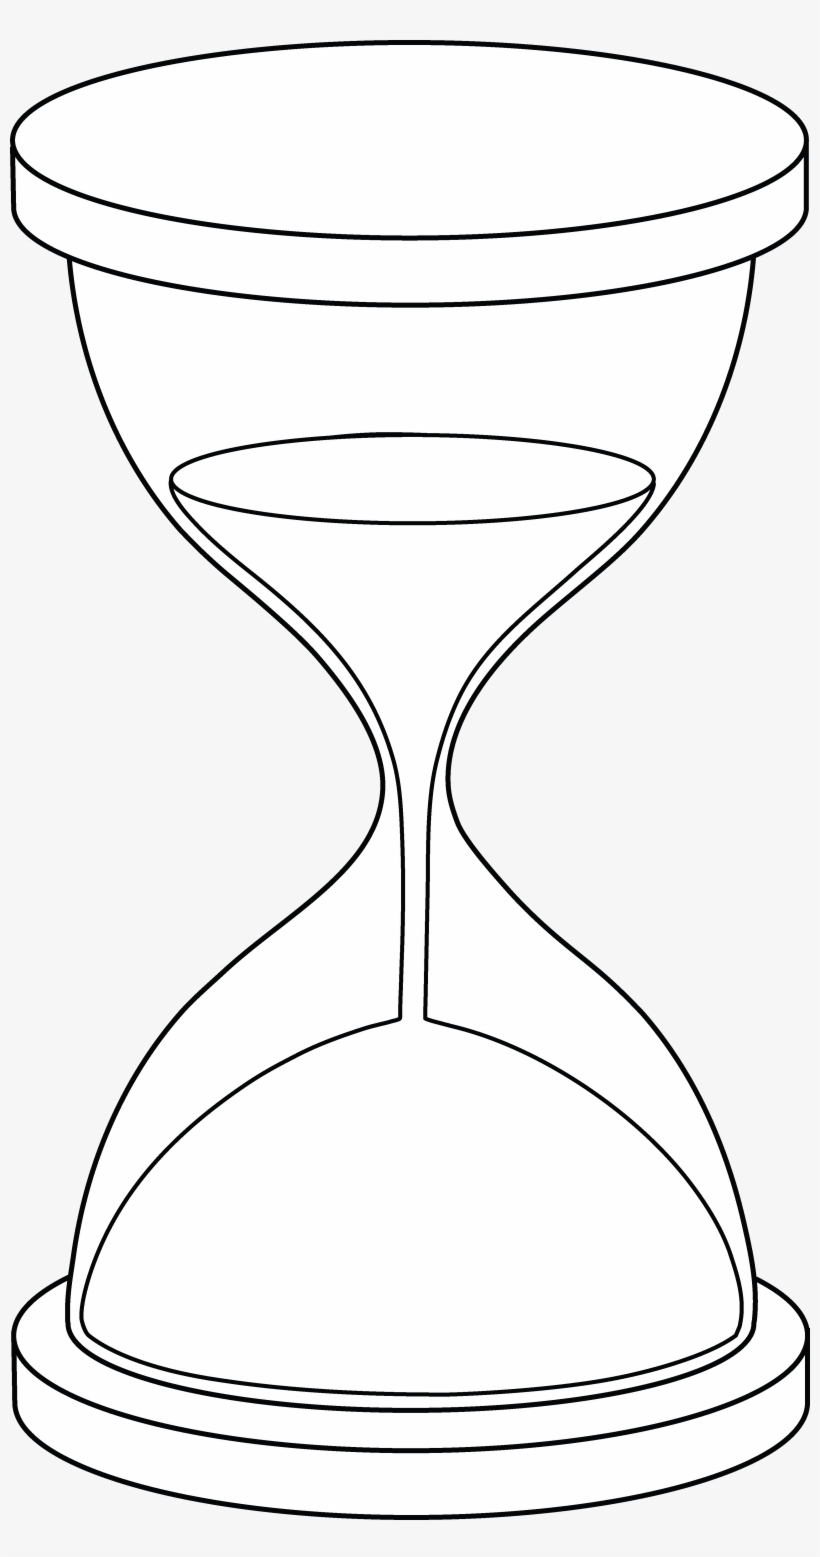 Clipart Stock Hourglass Clipart Sand Timer - White Hourglass Clipart, transparent png #70612